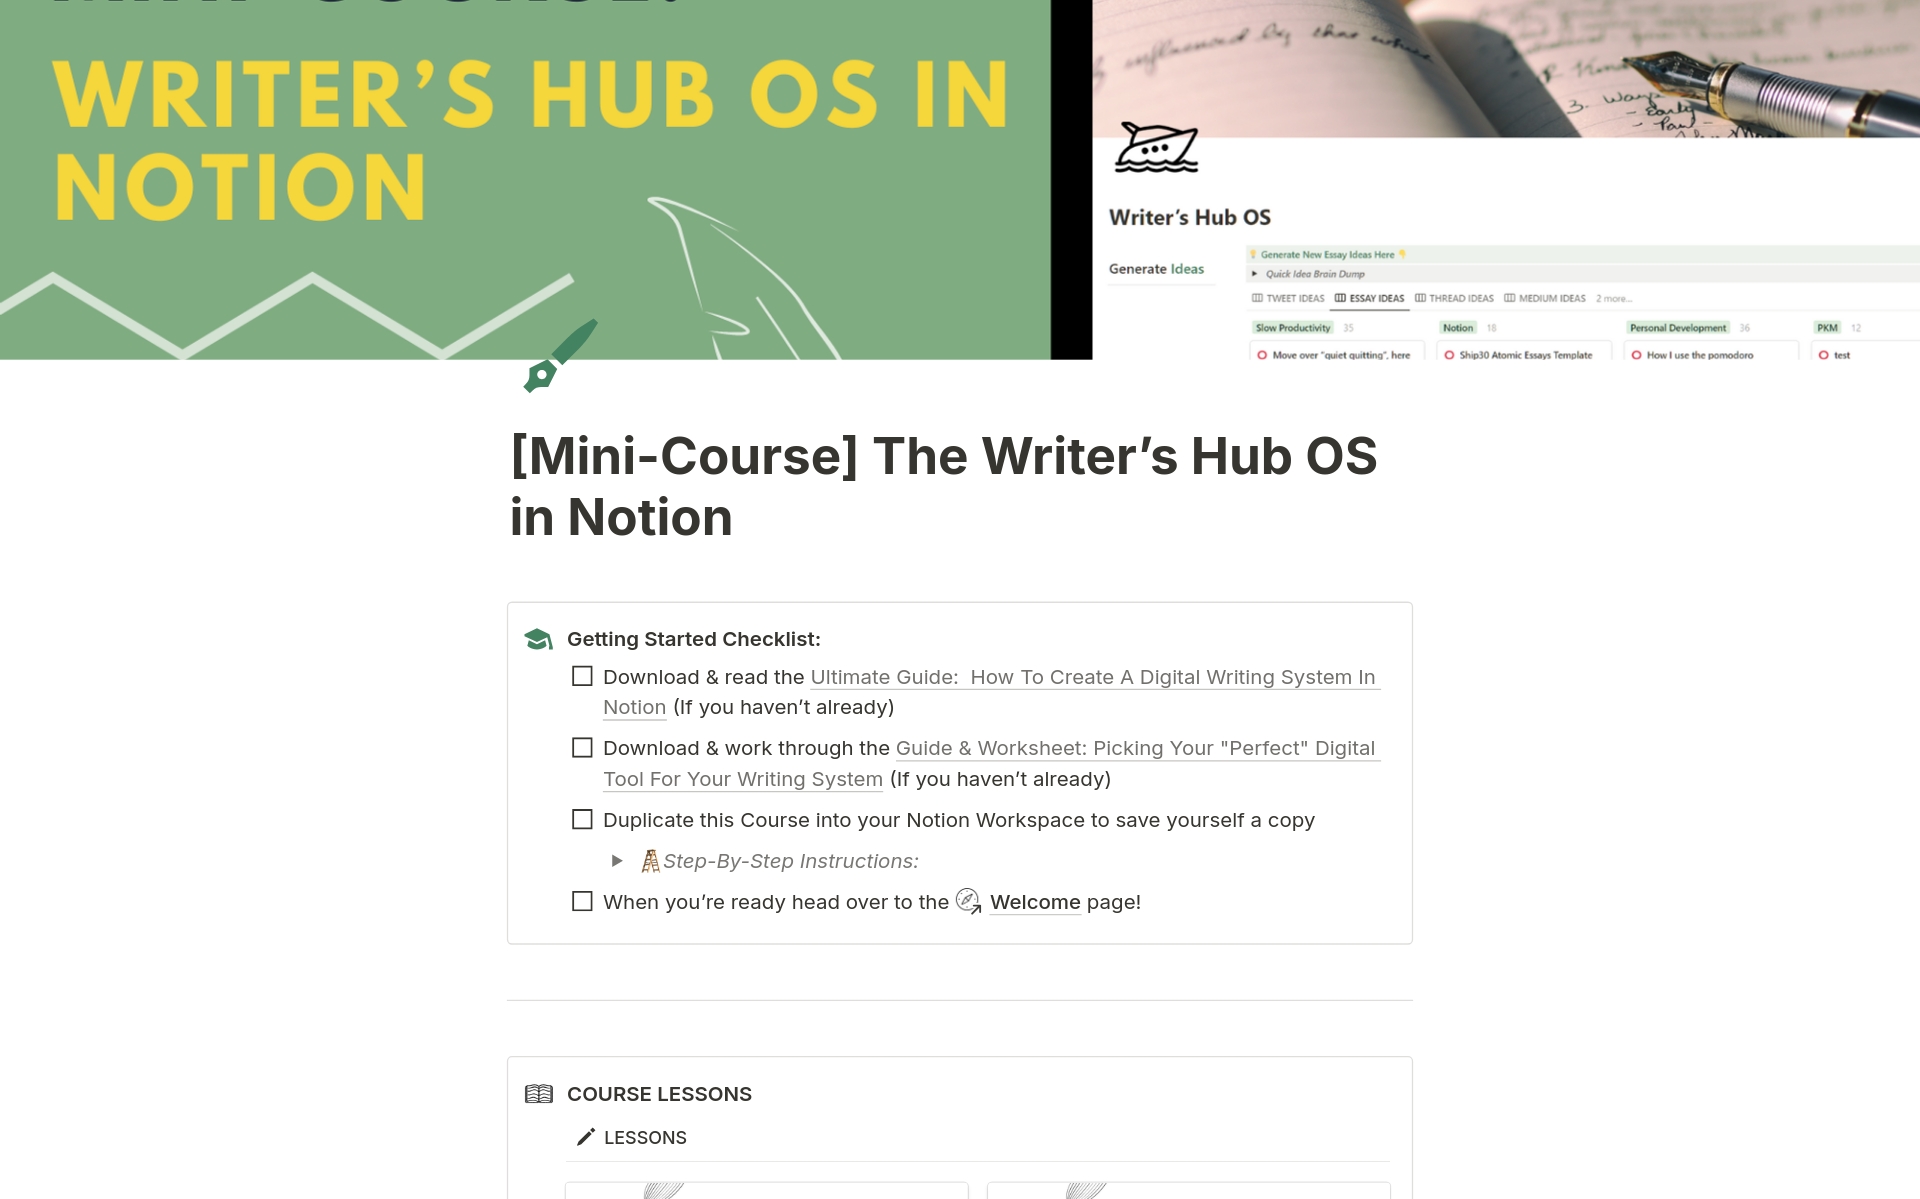 A simple proven writing system built in Notion for coaches, solopreneurs and content creators. Helping you go from idea capture through to hitting published, so you'll hit publish on your worse day, not just your best.